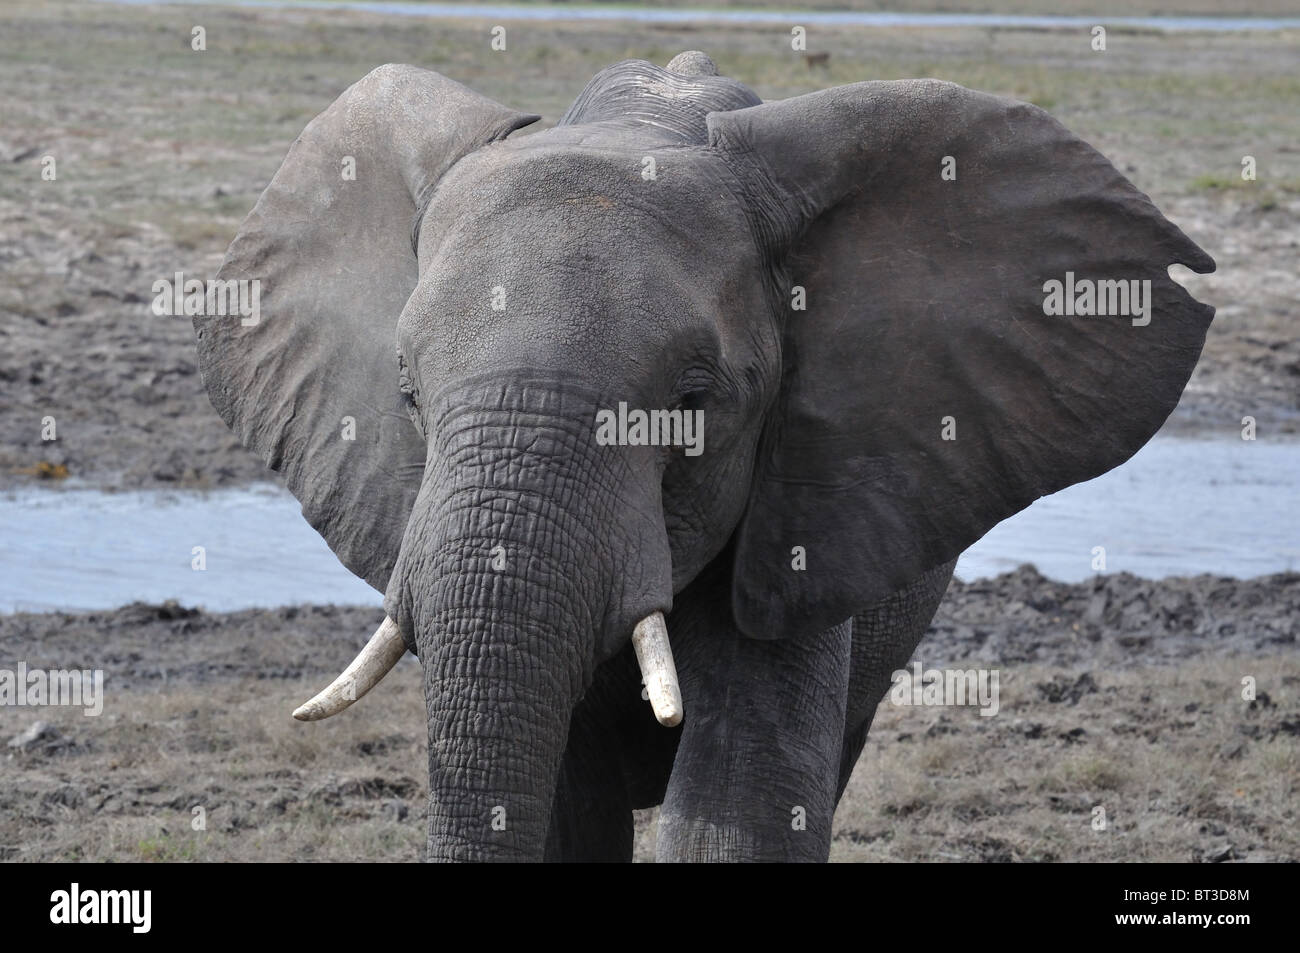 Elephant posturing to charge. Photographed in Chobe reserve Botswana Stock Photo